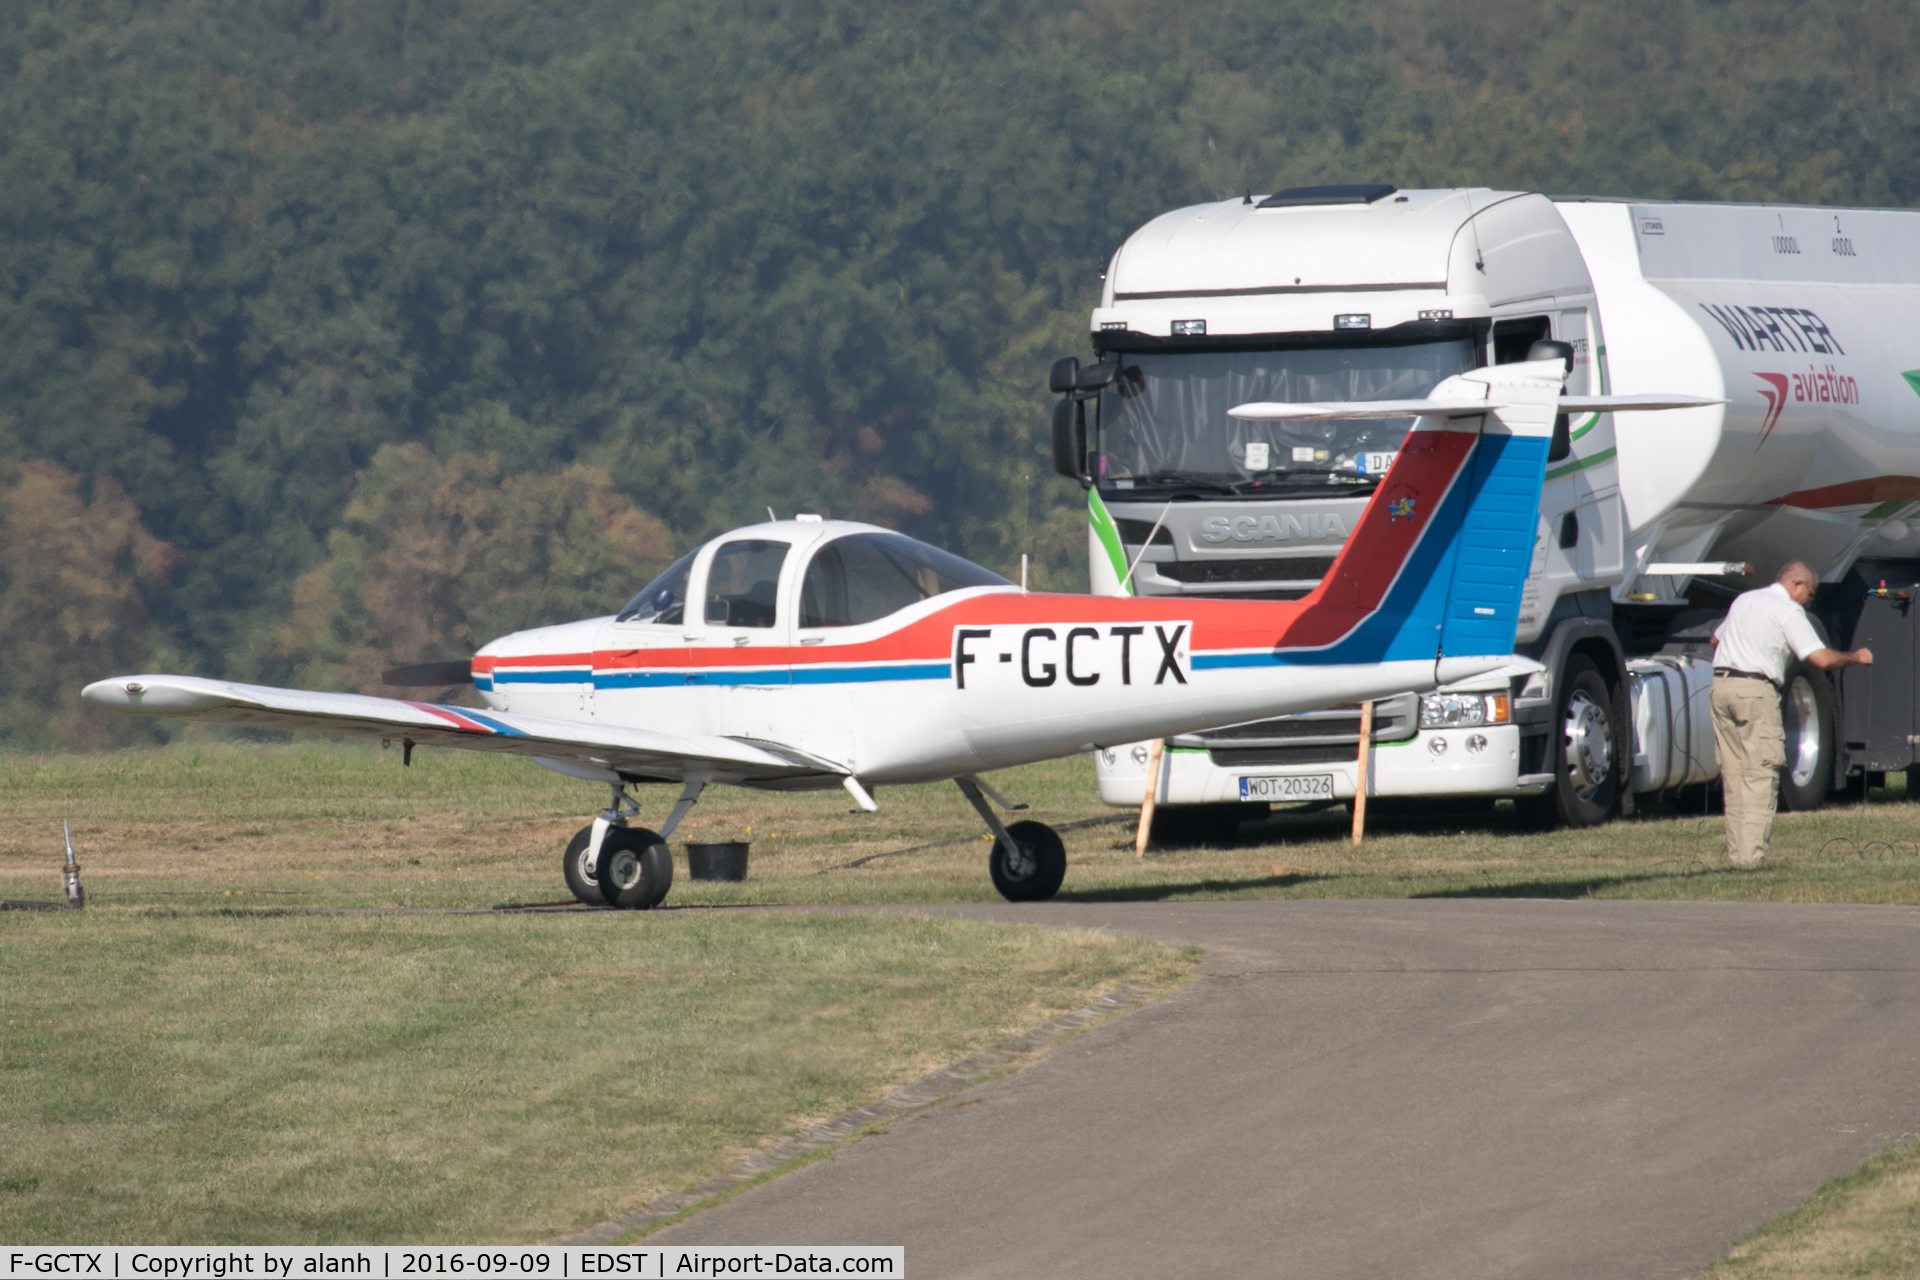 F-GCTX, Piper PA-38-112 Tomahawk Tomahawk C/N 3880A0088, Refueling after arrival at the 2016 Hahnweide Oldtimer Fliegertreffen